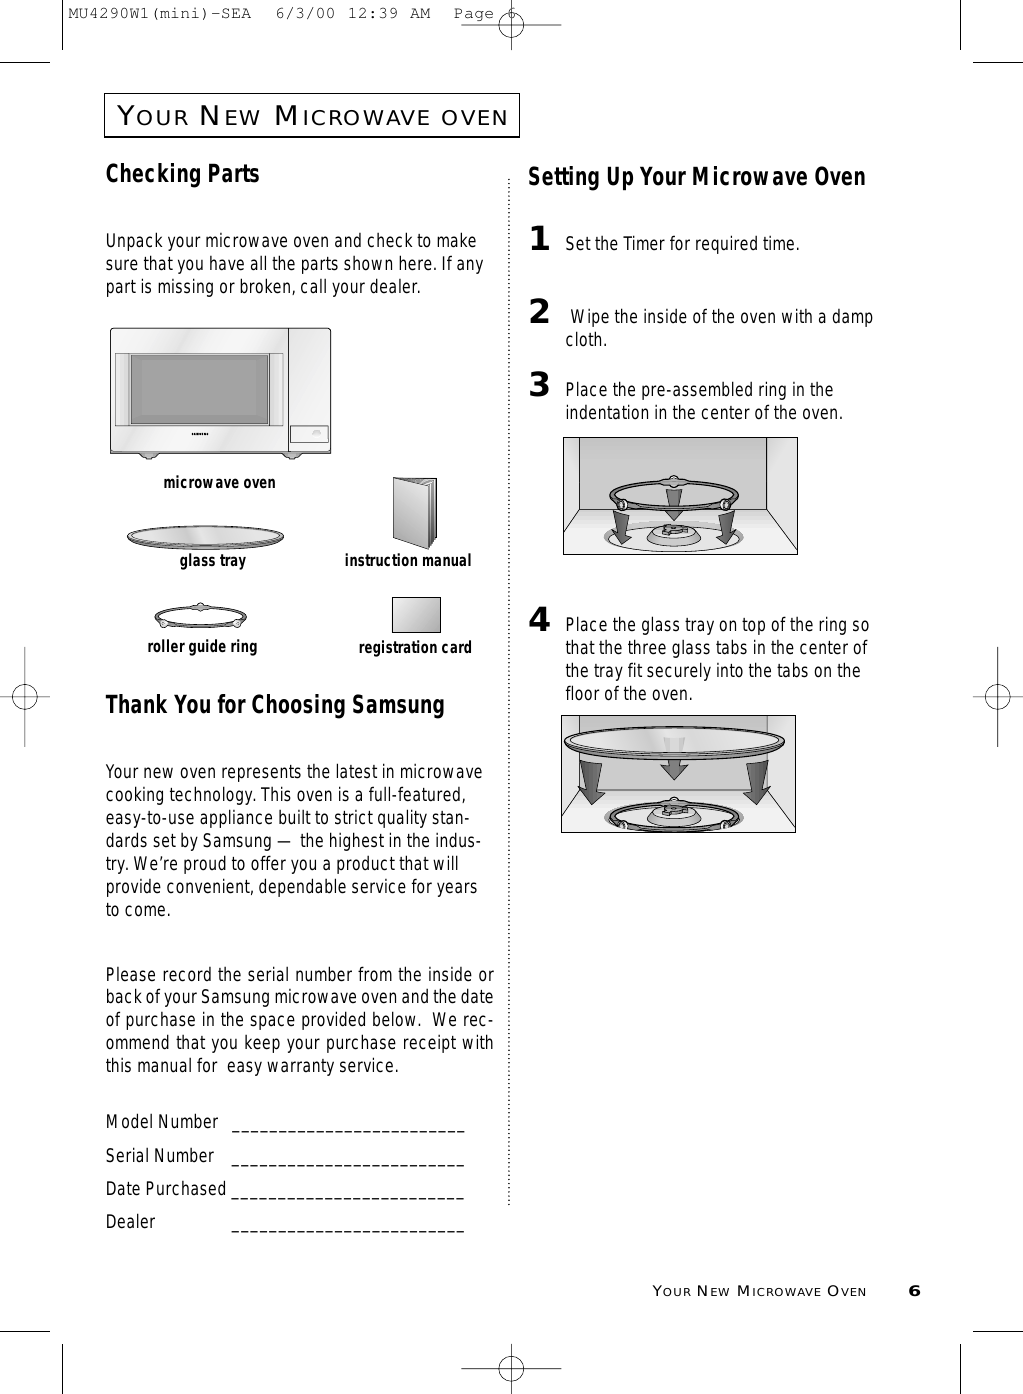 YOURNEWMICROWAVE OVEN6YOURNEWMICROWAVEOVENChecking PartsUnpack your microwave oven and check to makesure that you have all the parts shown here. If anypart is missing or broken, call your dealer.Thank You for Choosing SamsungYour new oven represents the latest in microwavecooking technology. This oven is a full-featured,easy-to-use appliance built to strict quality stan-dards set by Samsung — the highest in the indus-try. We’re proud to offer you a product that willprovide convenient, dependable service for yearsto come. Please record the serial number from the inside orback of your Samsung microwave oven and the dateof purchase in the space provided below.  We rec-ommend that you keep your purchase receipt withthis manual for  easy warranty service. Model Number   _________________________Serial Number _________________________Date Purchased _________________________Dealer _________________________Setting Up Your Microwave Oven1Set the Timer for required time.2Wipe the inside of the oven with a dampcloth.3Place the pre-assembled ring in theindentation in the center of the oven.4Place the glass tray on top of the ring sothat the three glass tabs in the center ofthe tray fit securely into the tabs on thefloor of the oven.microwave ovenglass trayroller guide ringinstruction manualregistration cardMU4290W1(mini)-SEA  6/3/00 12:39 AM  Page 6